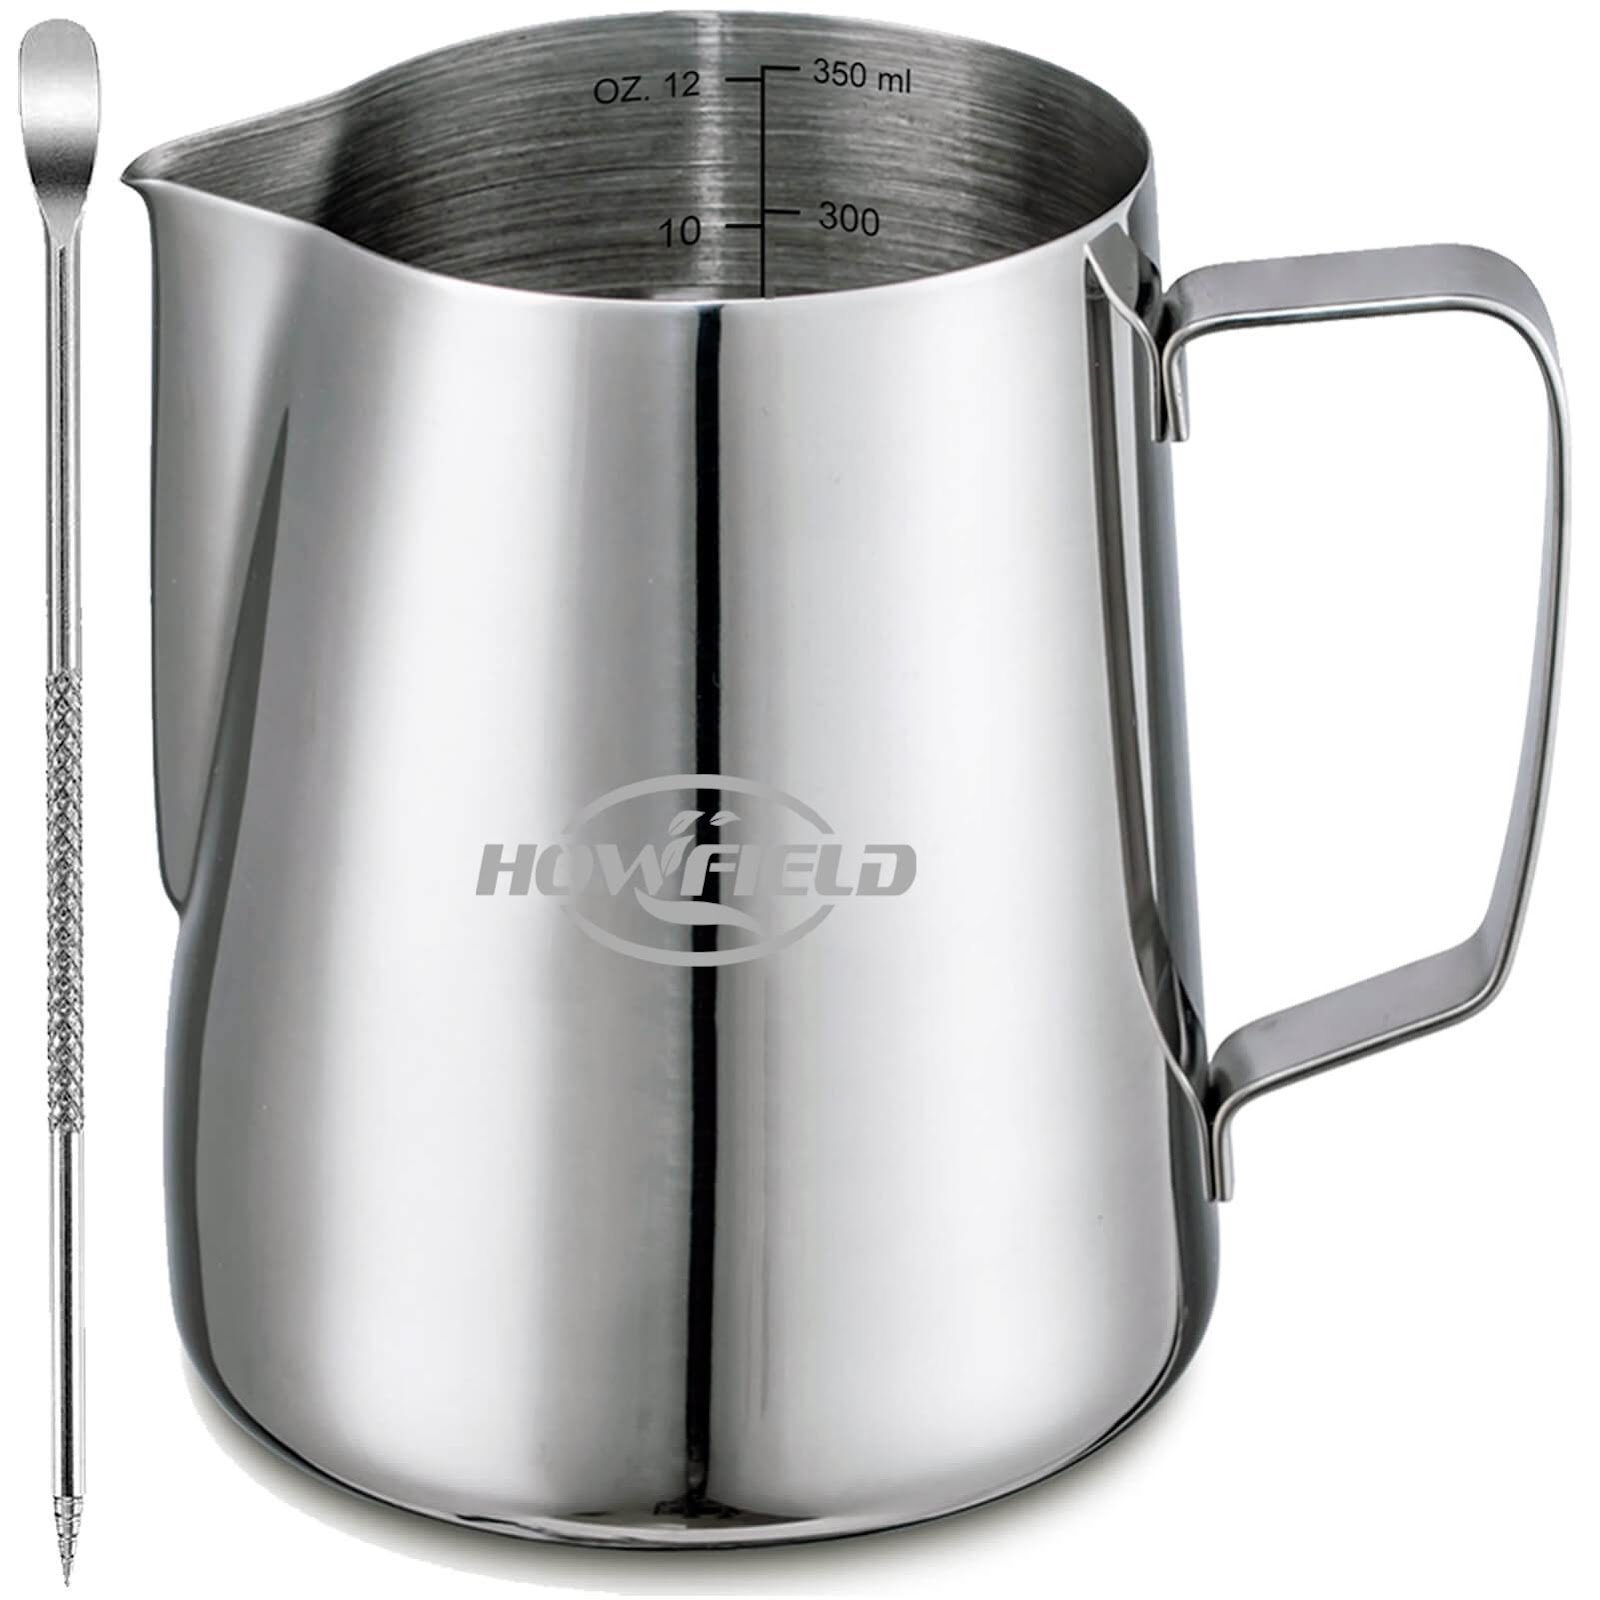 HOWFIELD Milk Frothing Pitcher